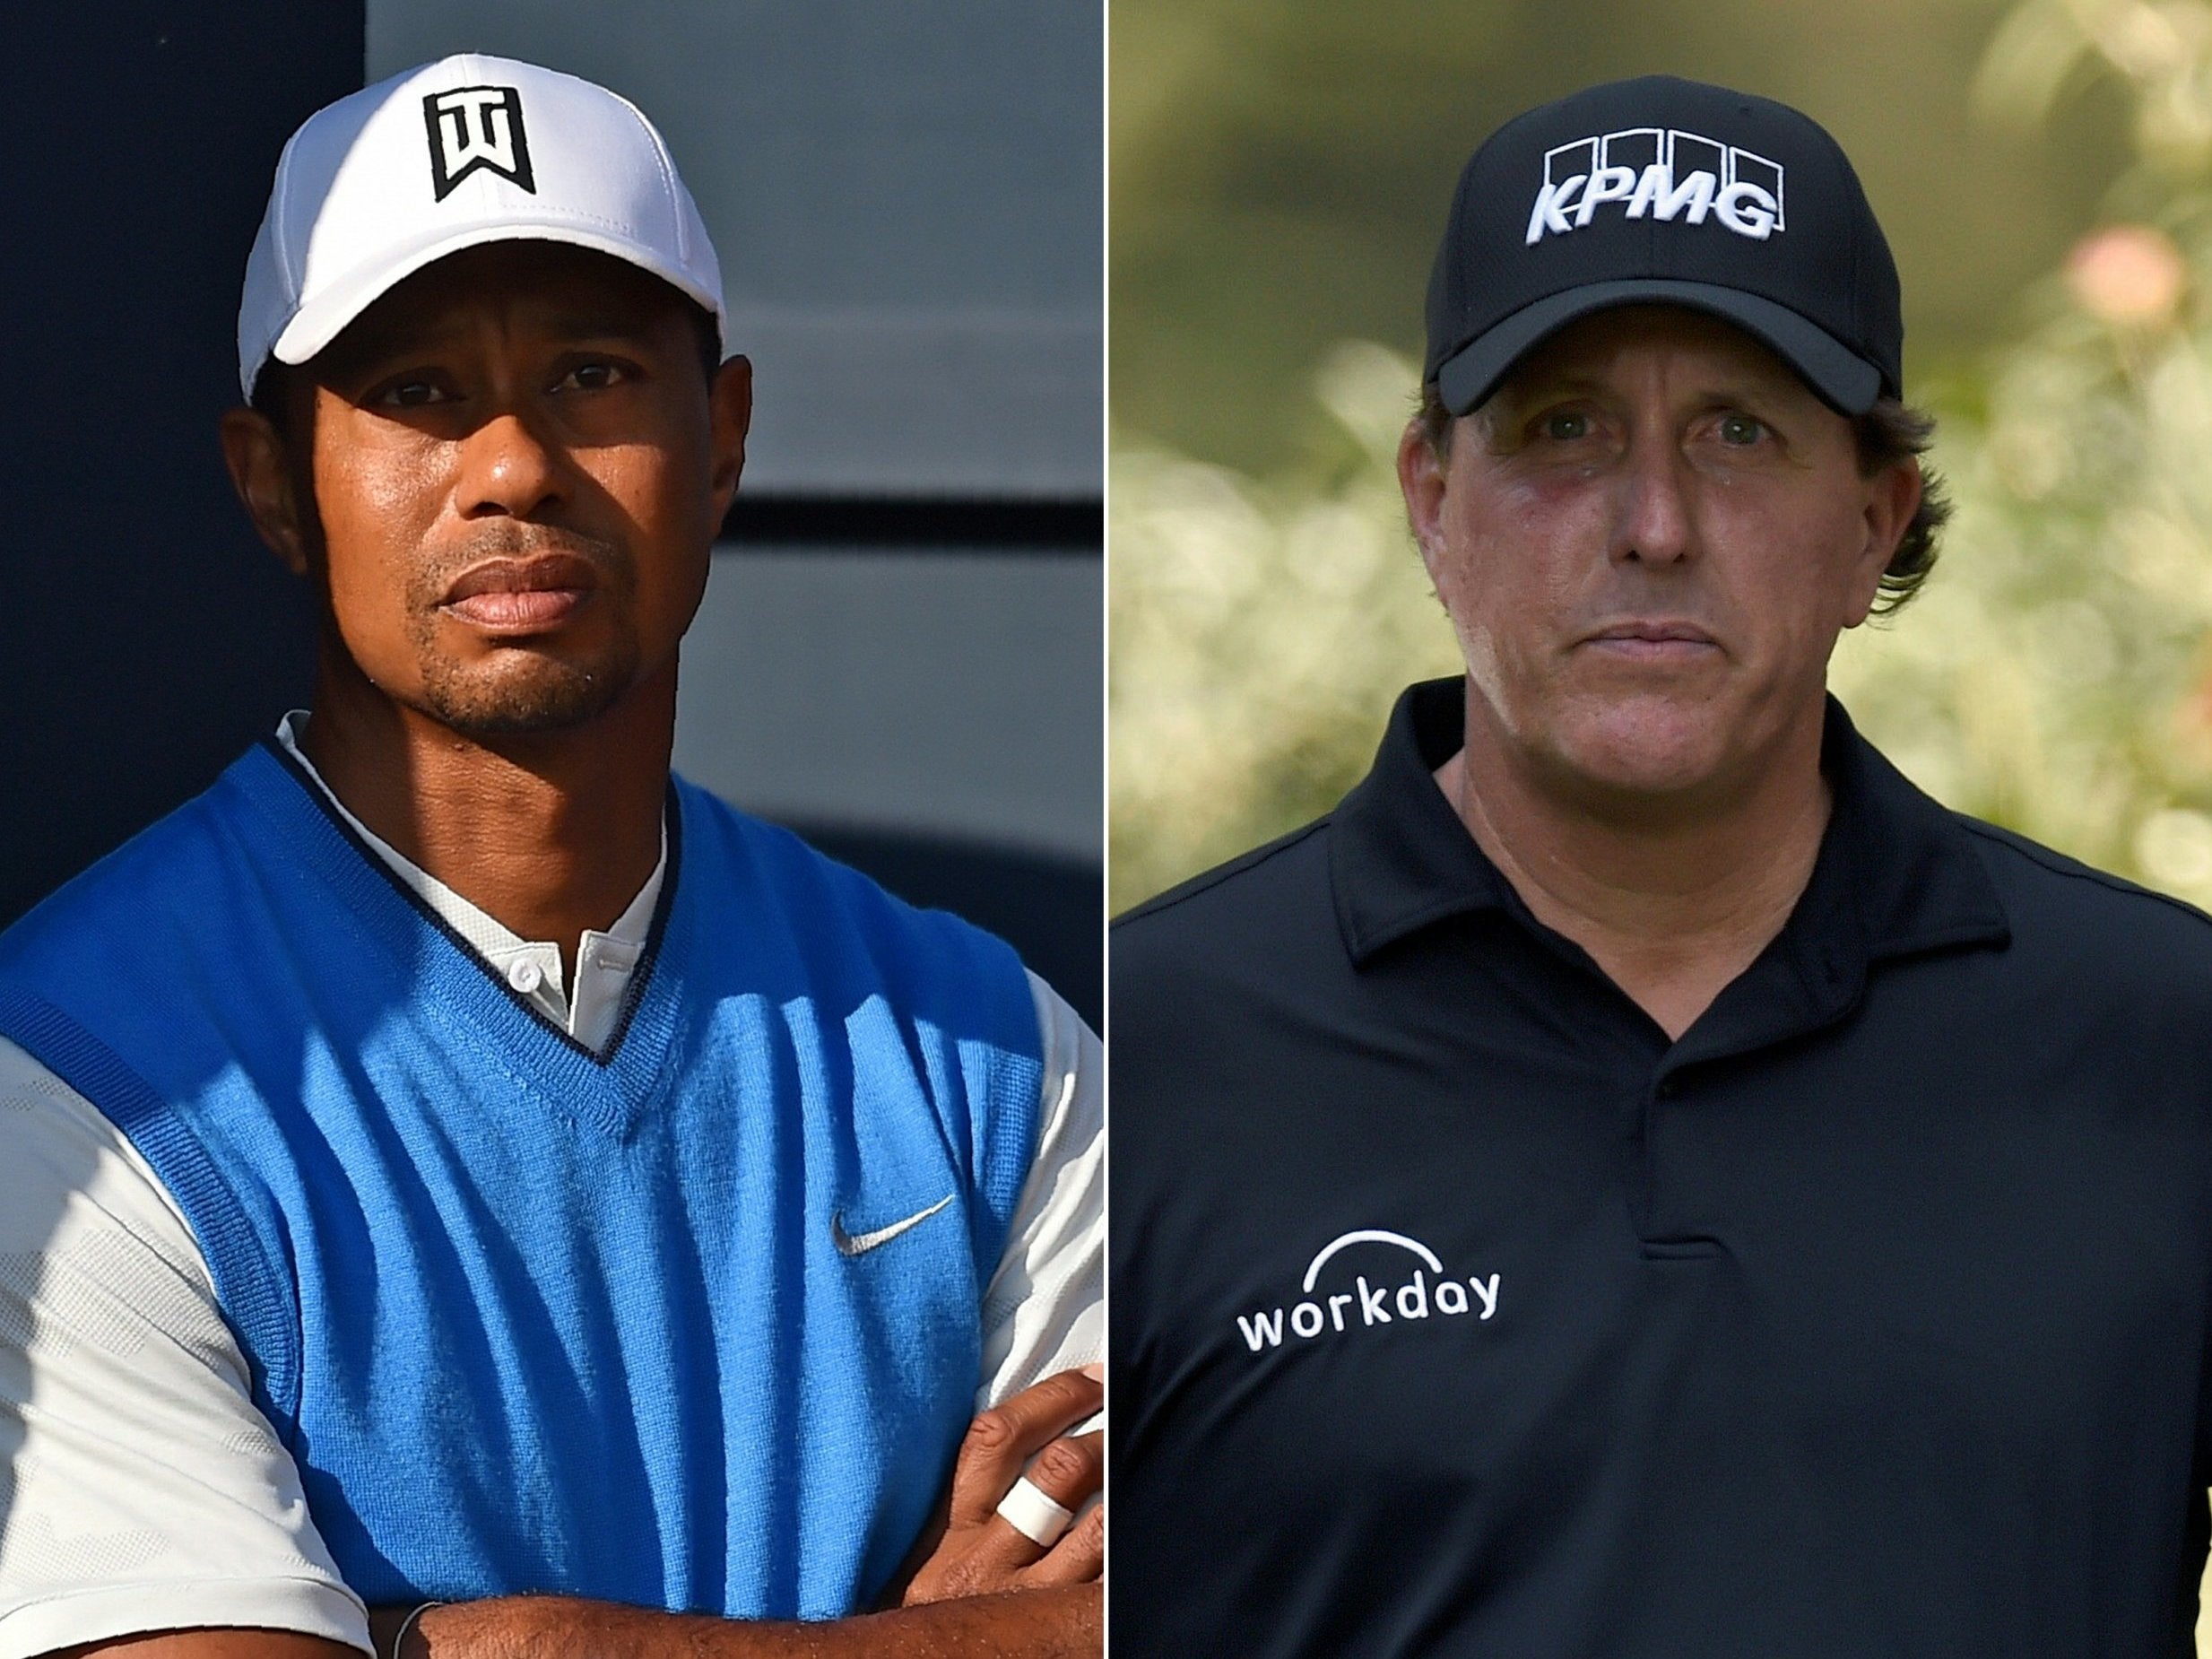 Tiger Woods vs Phil Mickelson head-to-head match confirmed with £7m ...